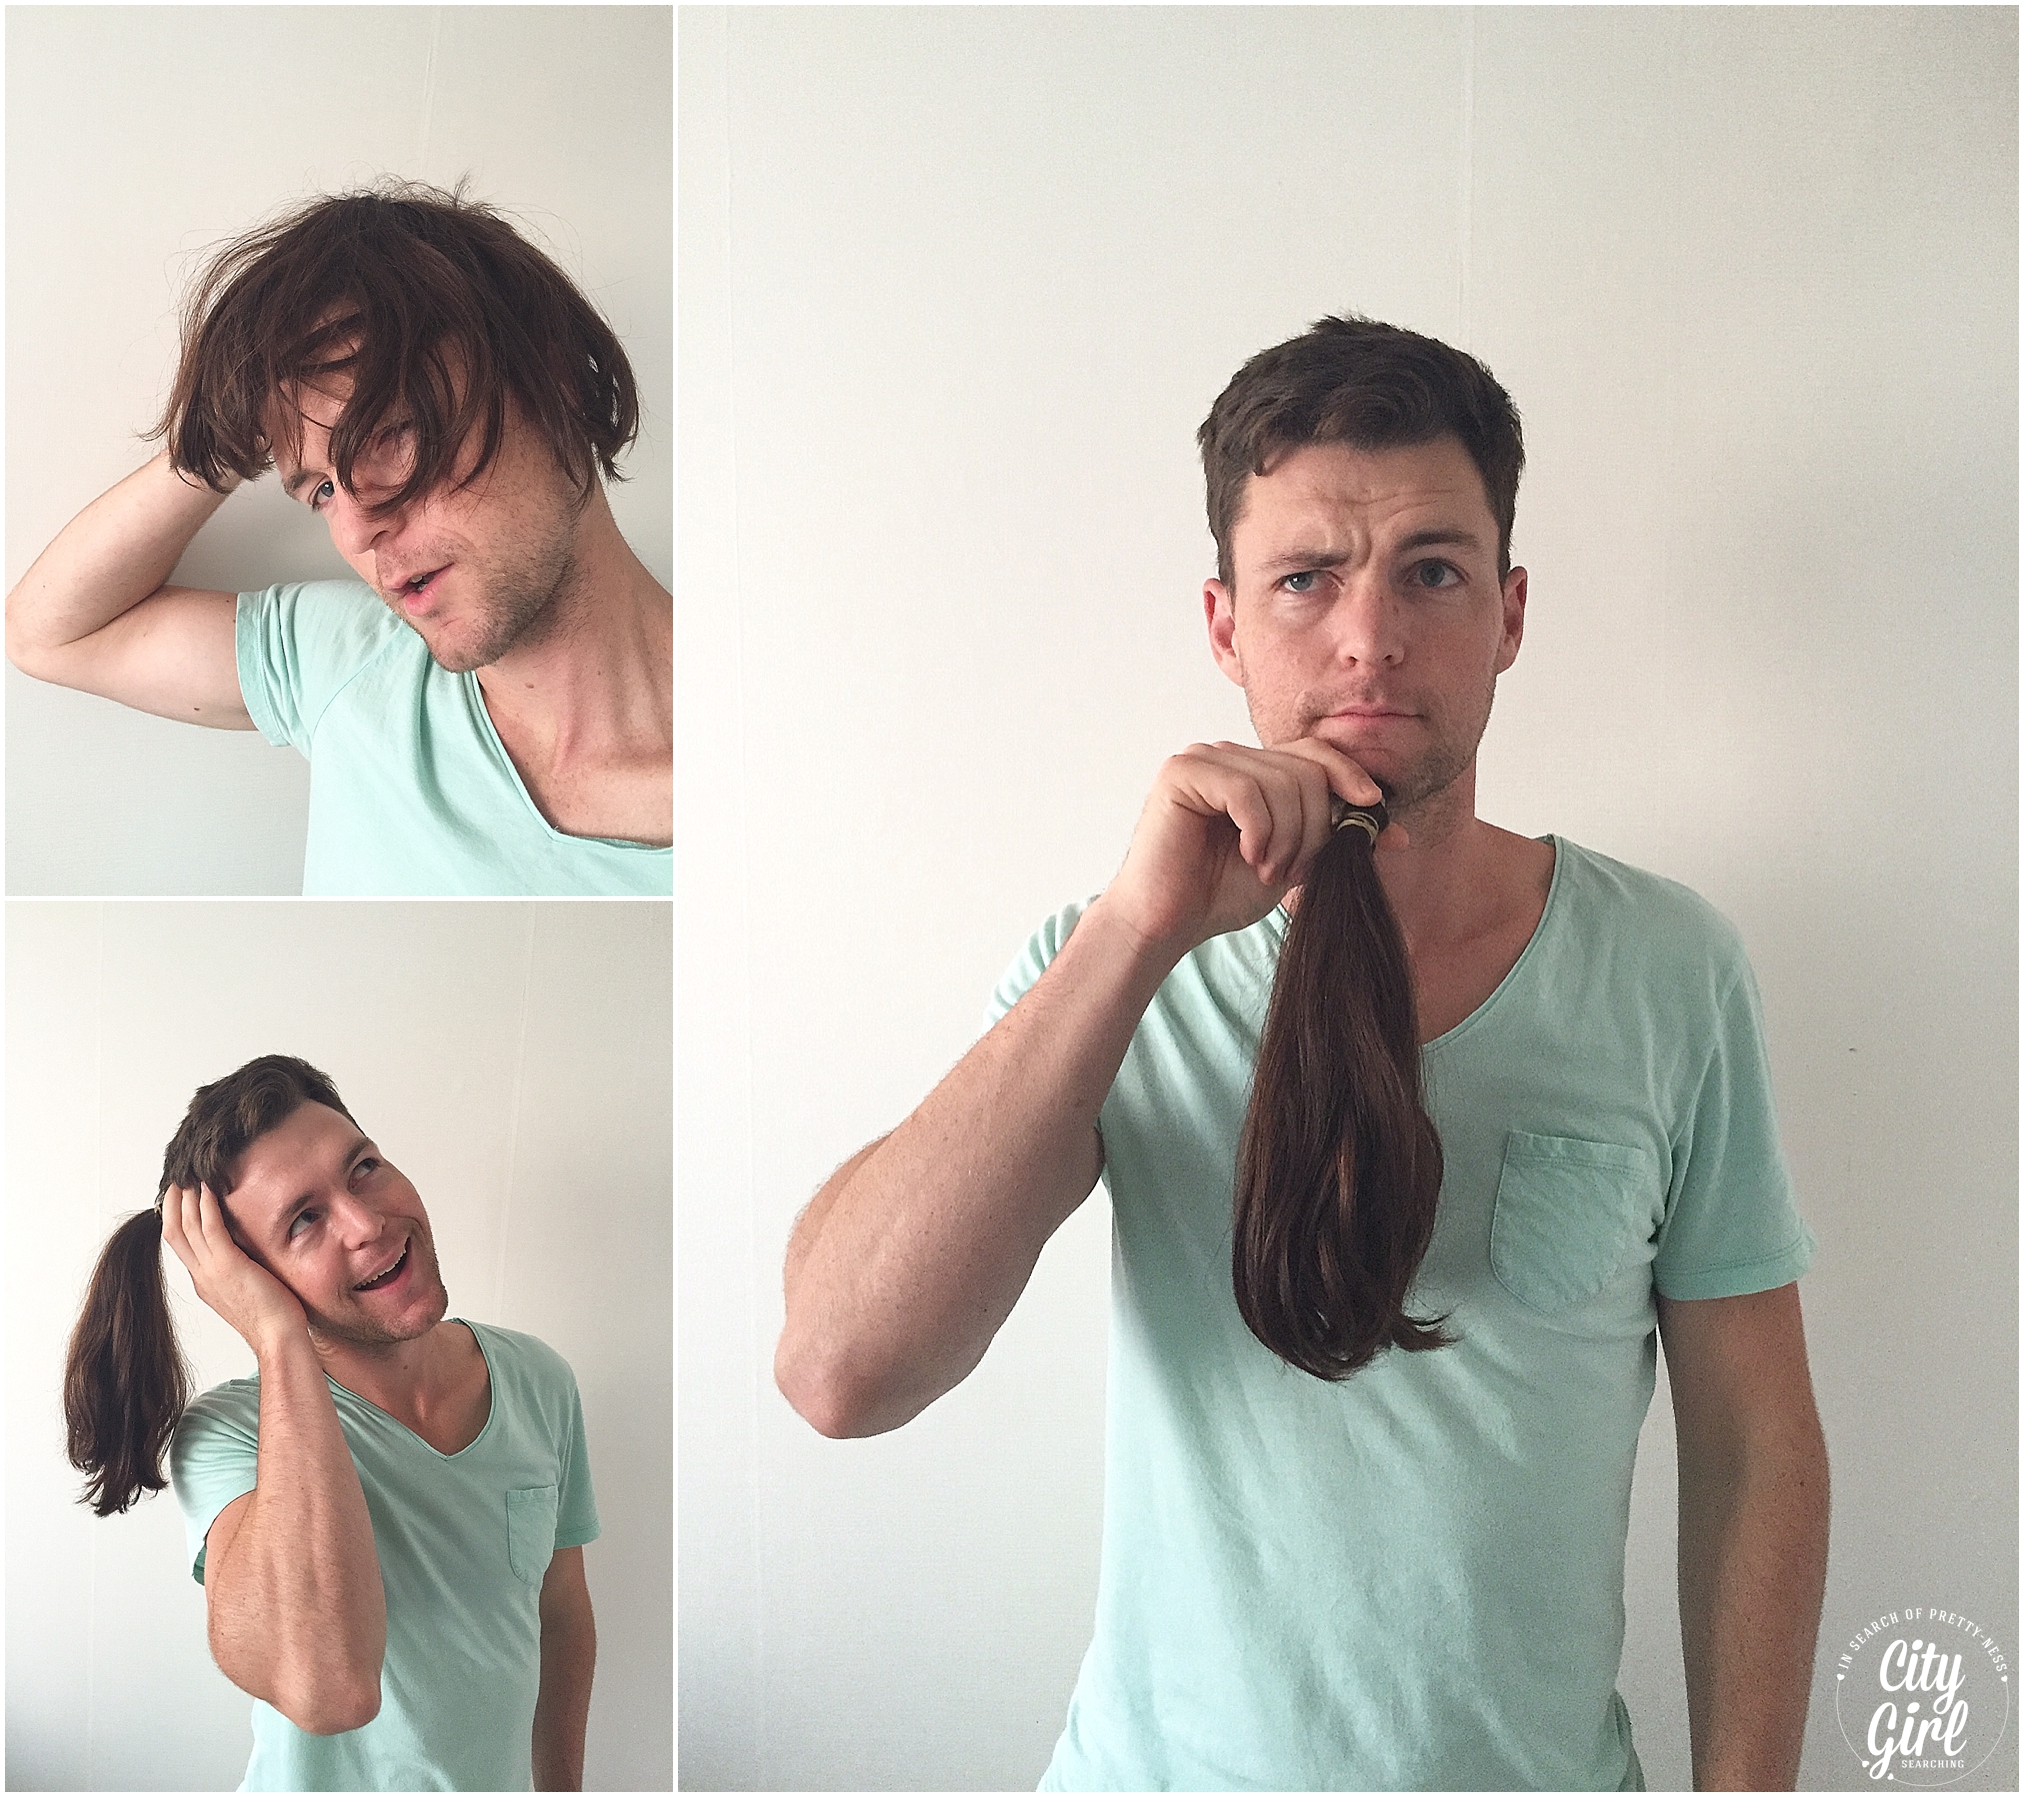 chopping off your locks - donating your hair to charity in